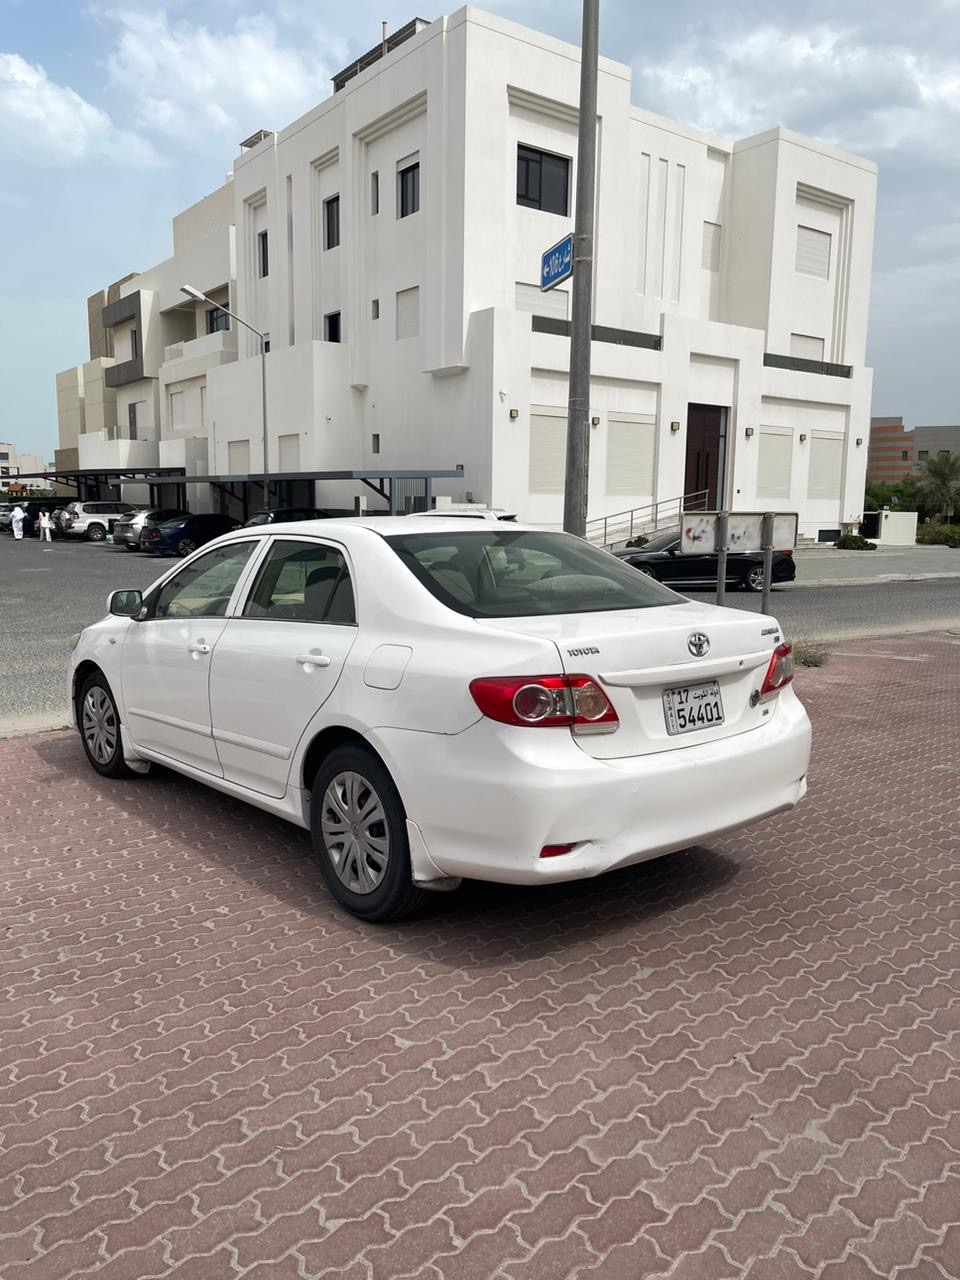 Corolla 2013 white good condition car available for sale 